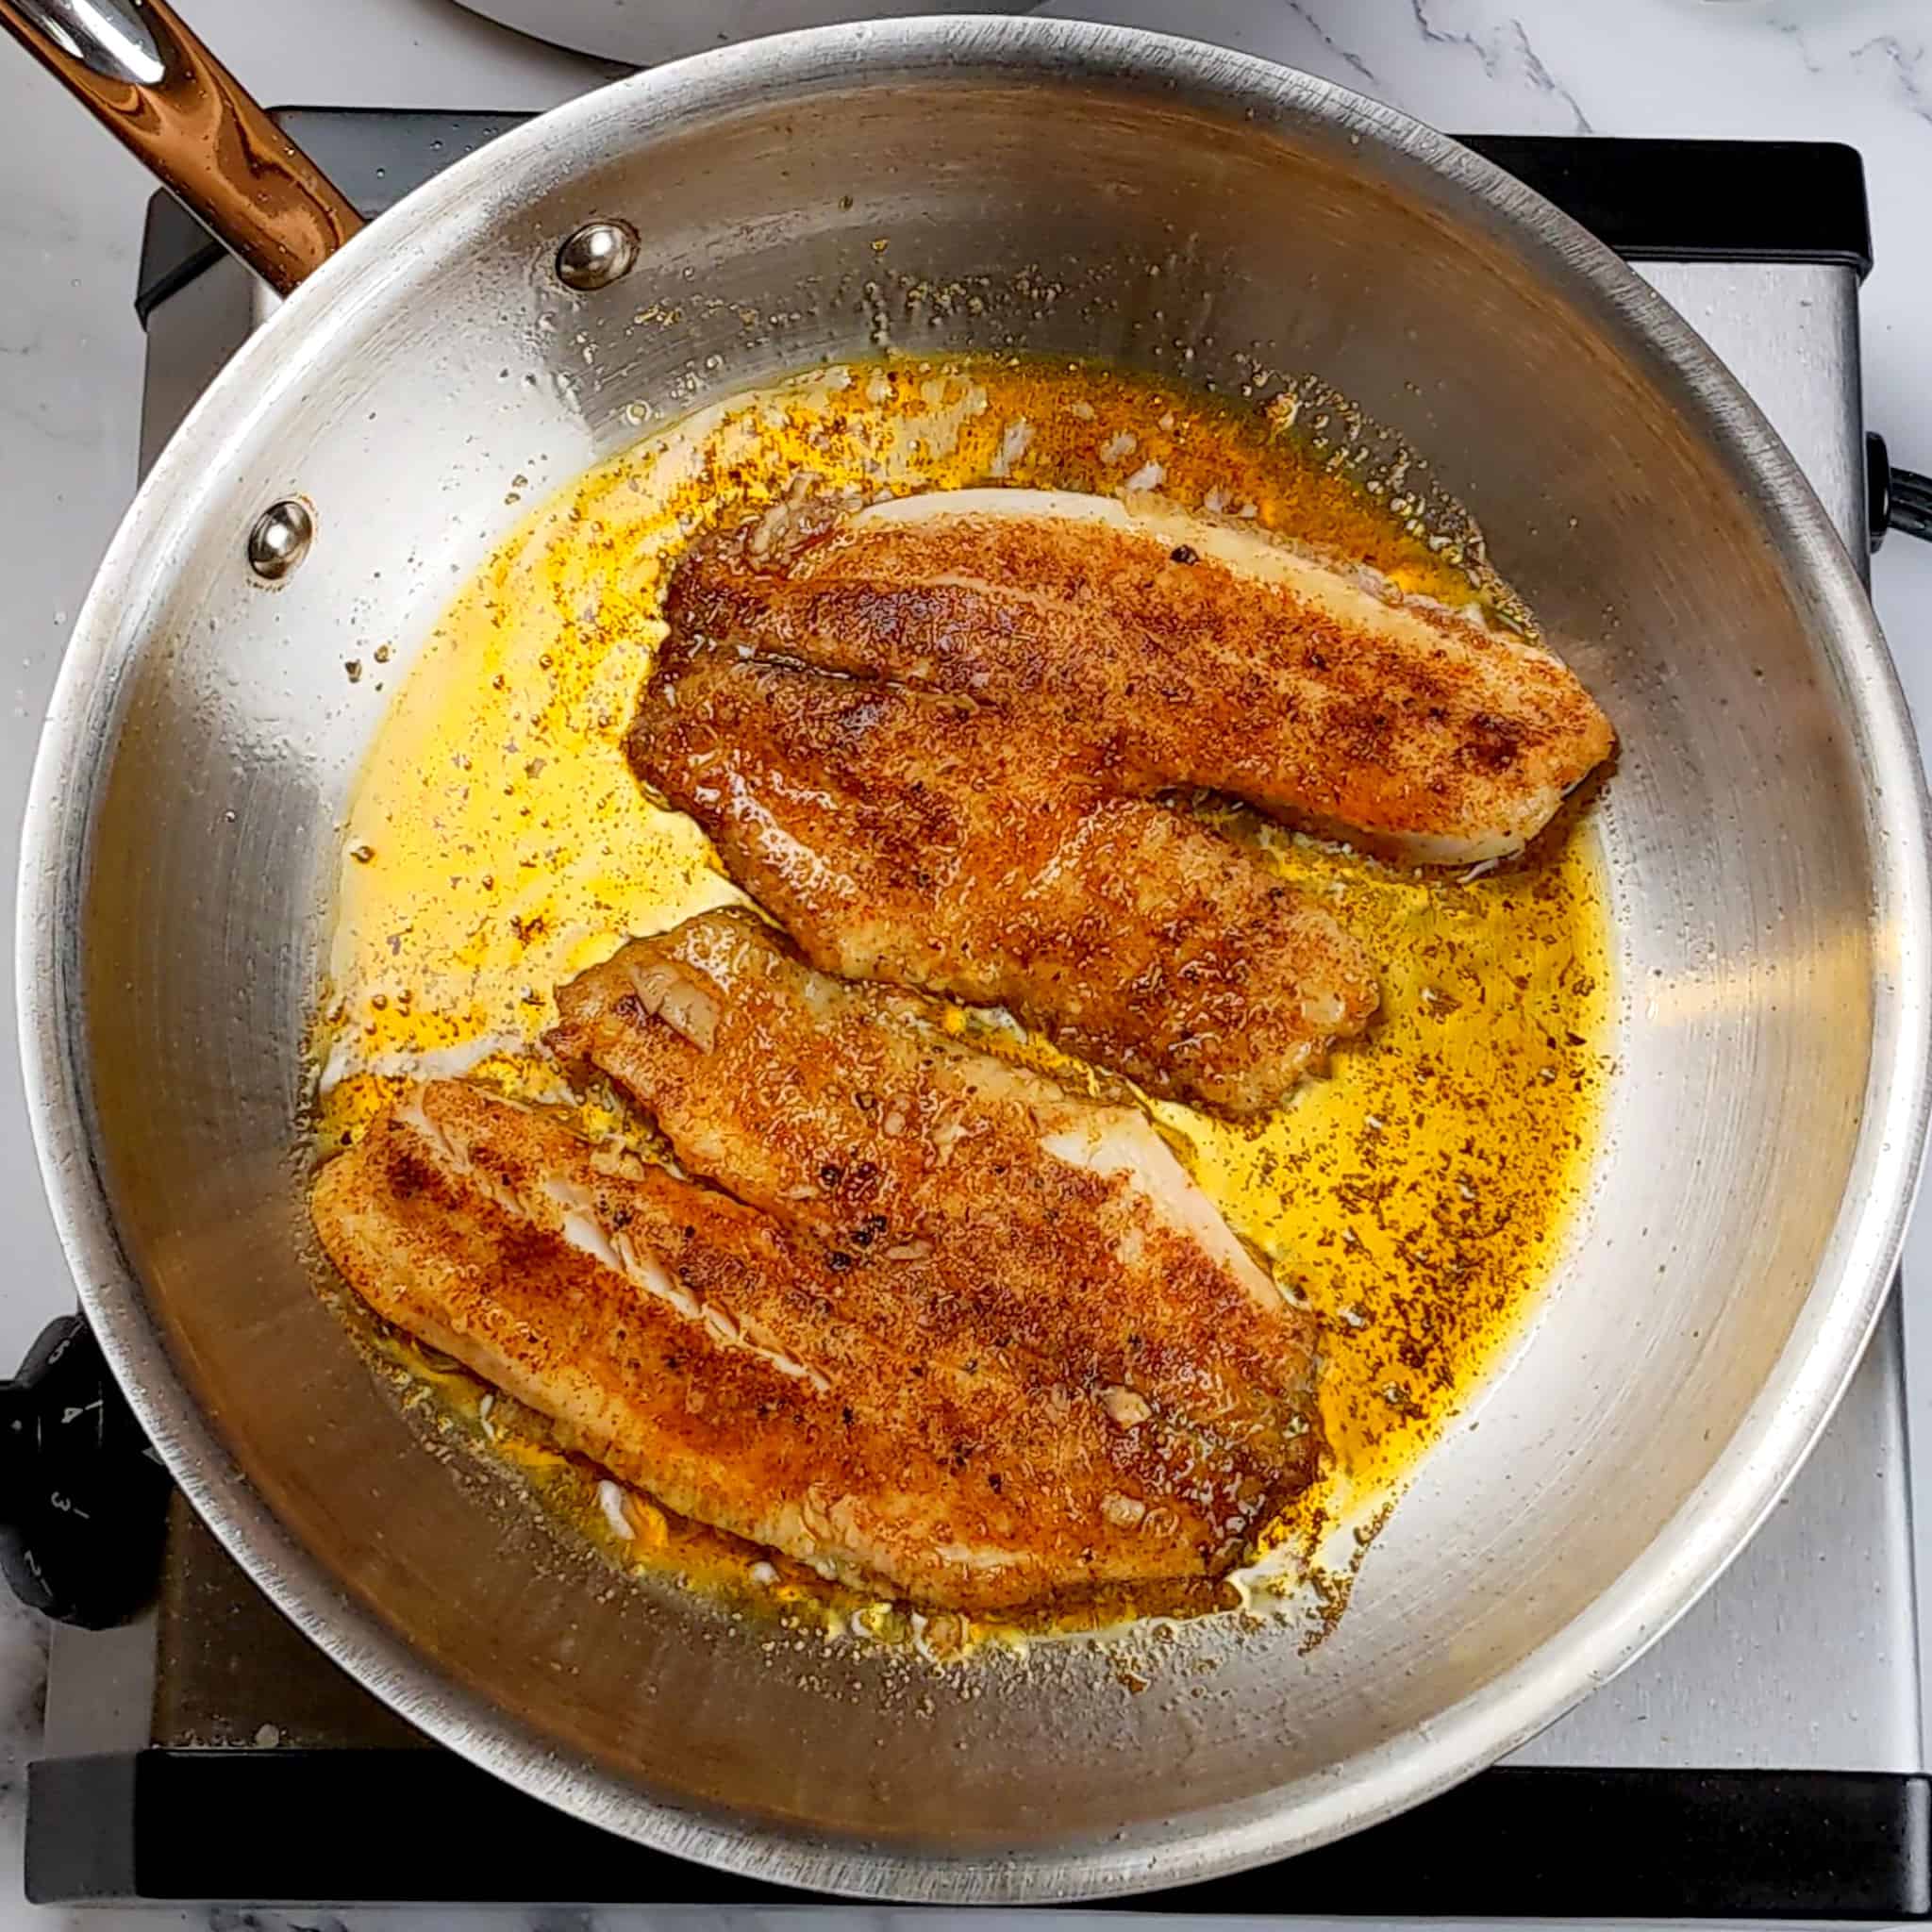 two tilapia filets, both flipped with season side up searing in an stainless steel frying pan.